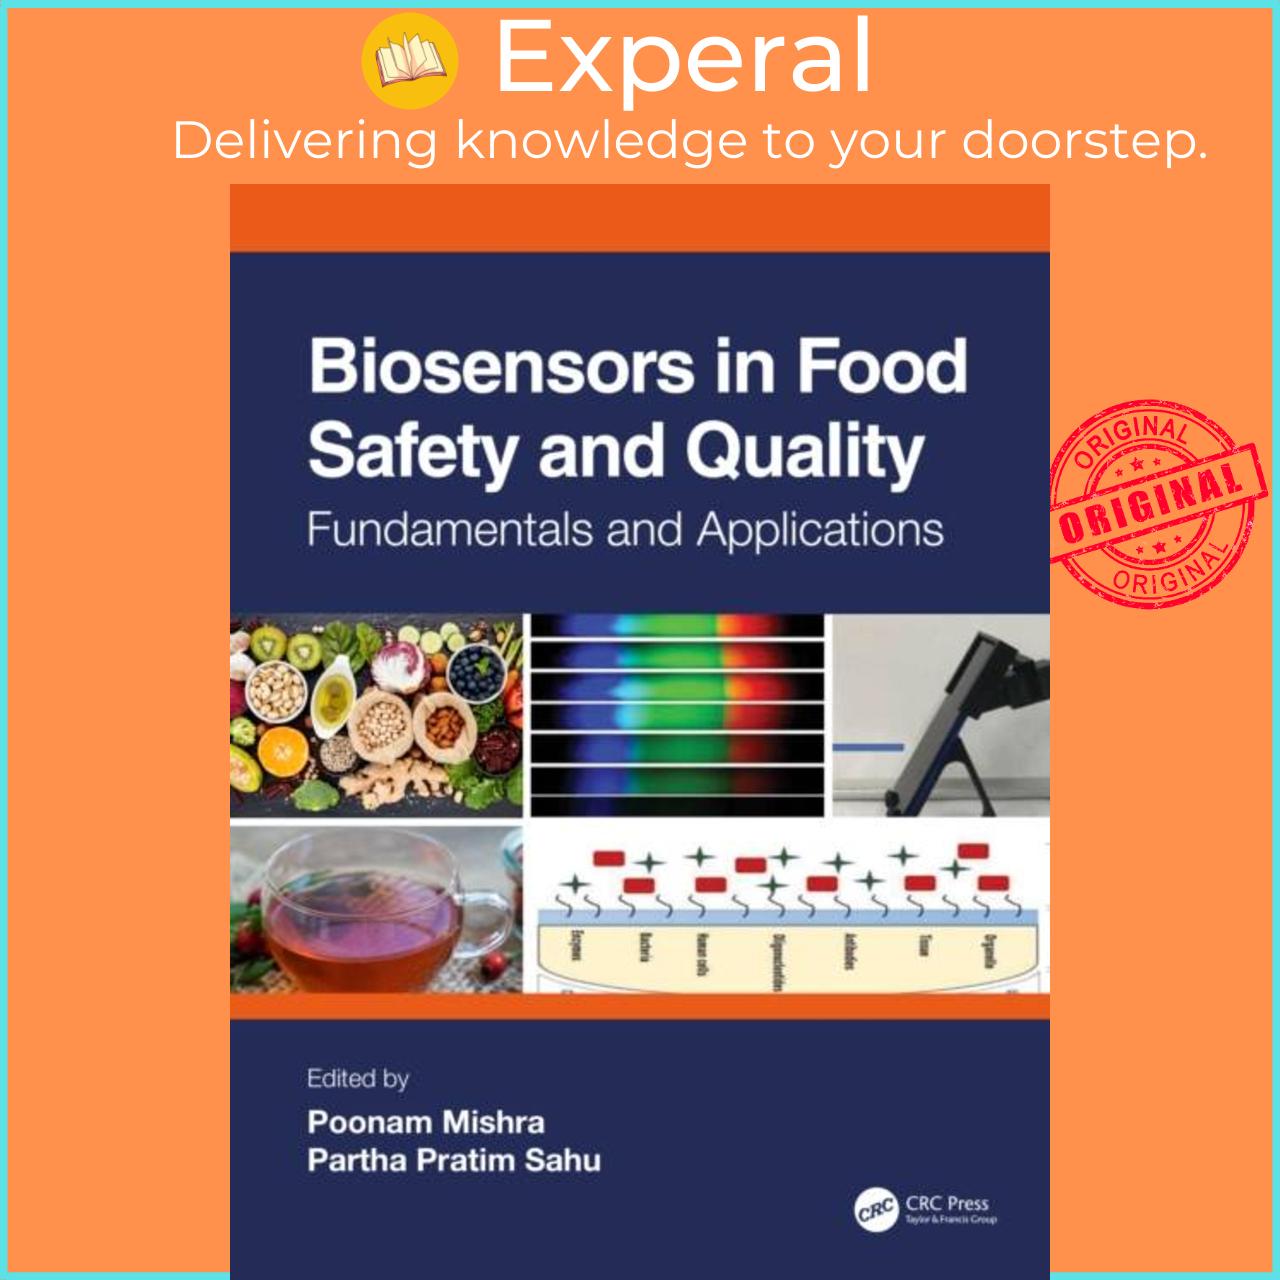 Sách - Biosensors in Food Safety and Quality - Fundamentals and Applications by Poonam Mishra (UK edition, hardcover)